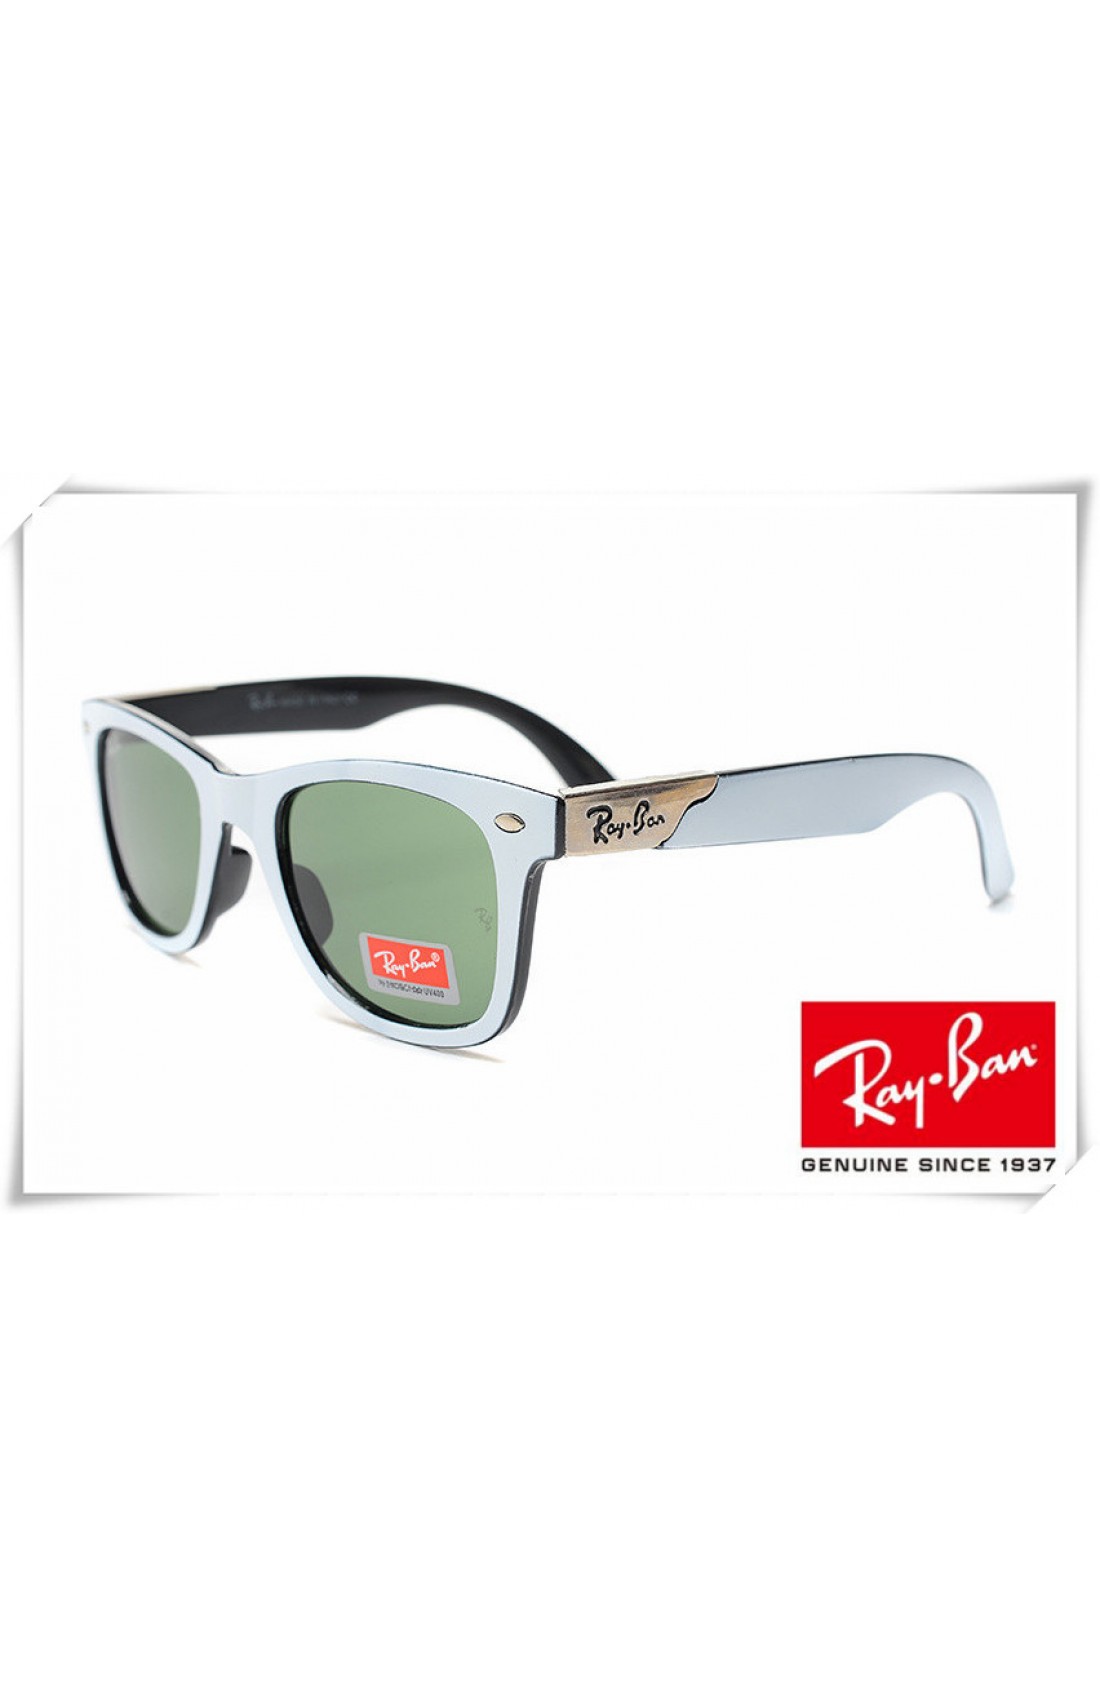 black and white ray bans